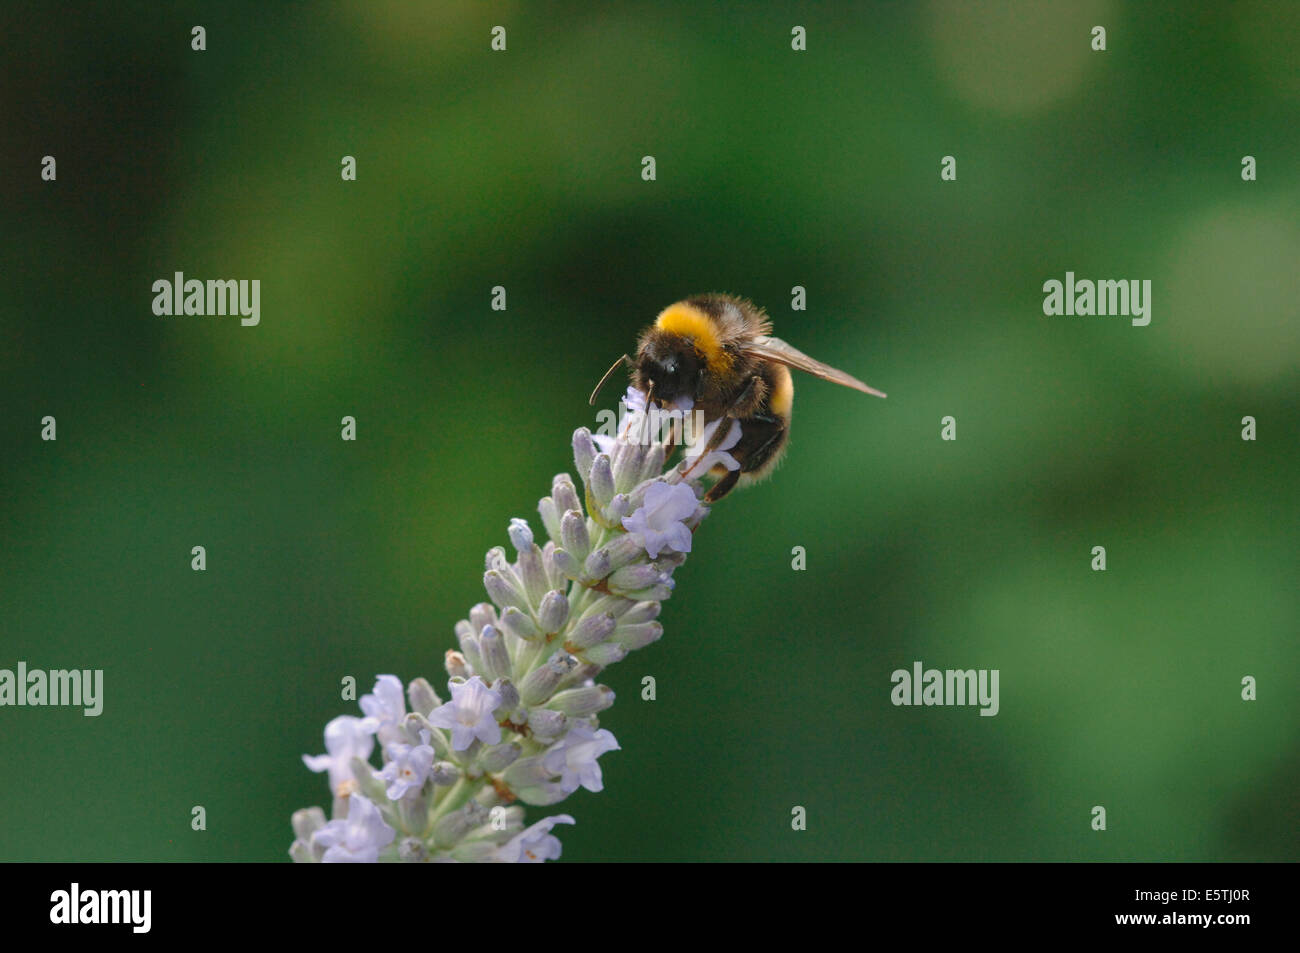 A Buff-Tailed Bumble Bee On Lavender Flowers.(Bombus terrestris). Stock Photo